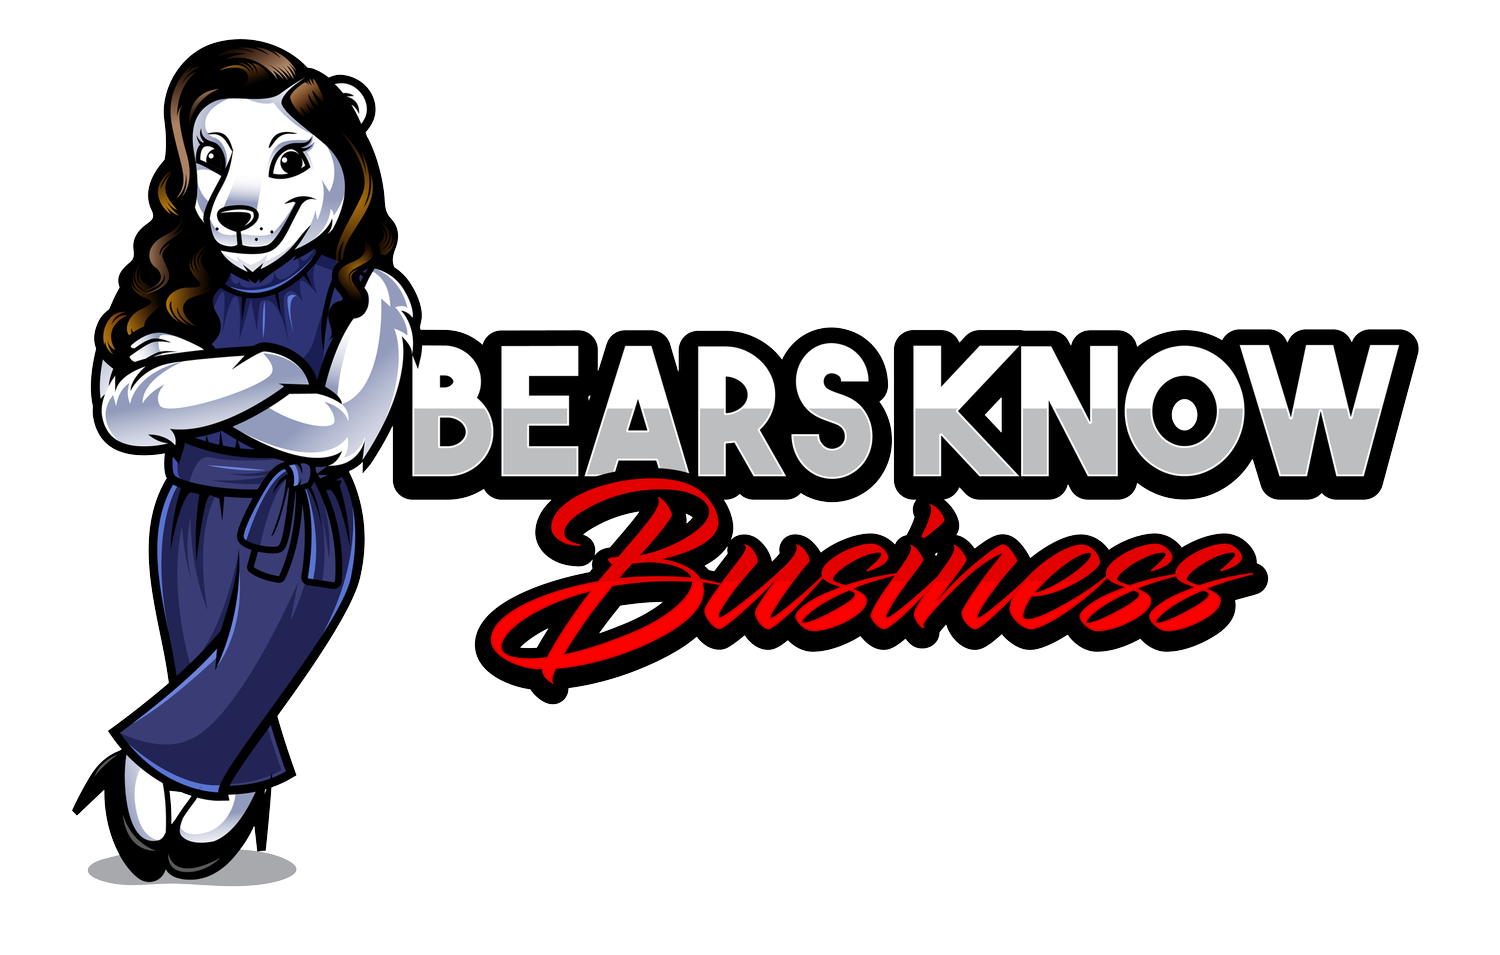 Bears Know Business